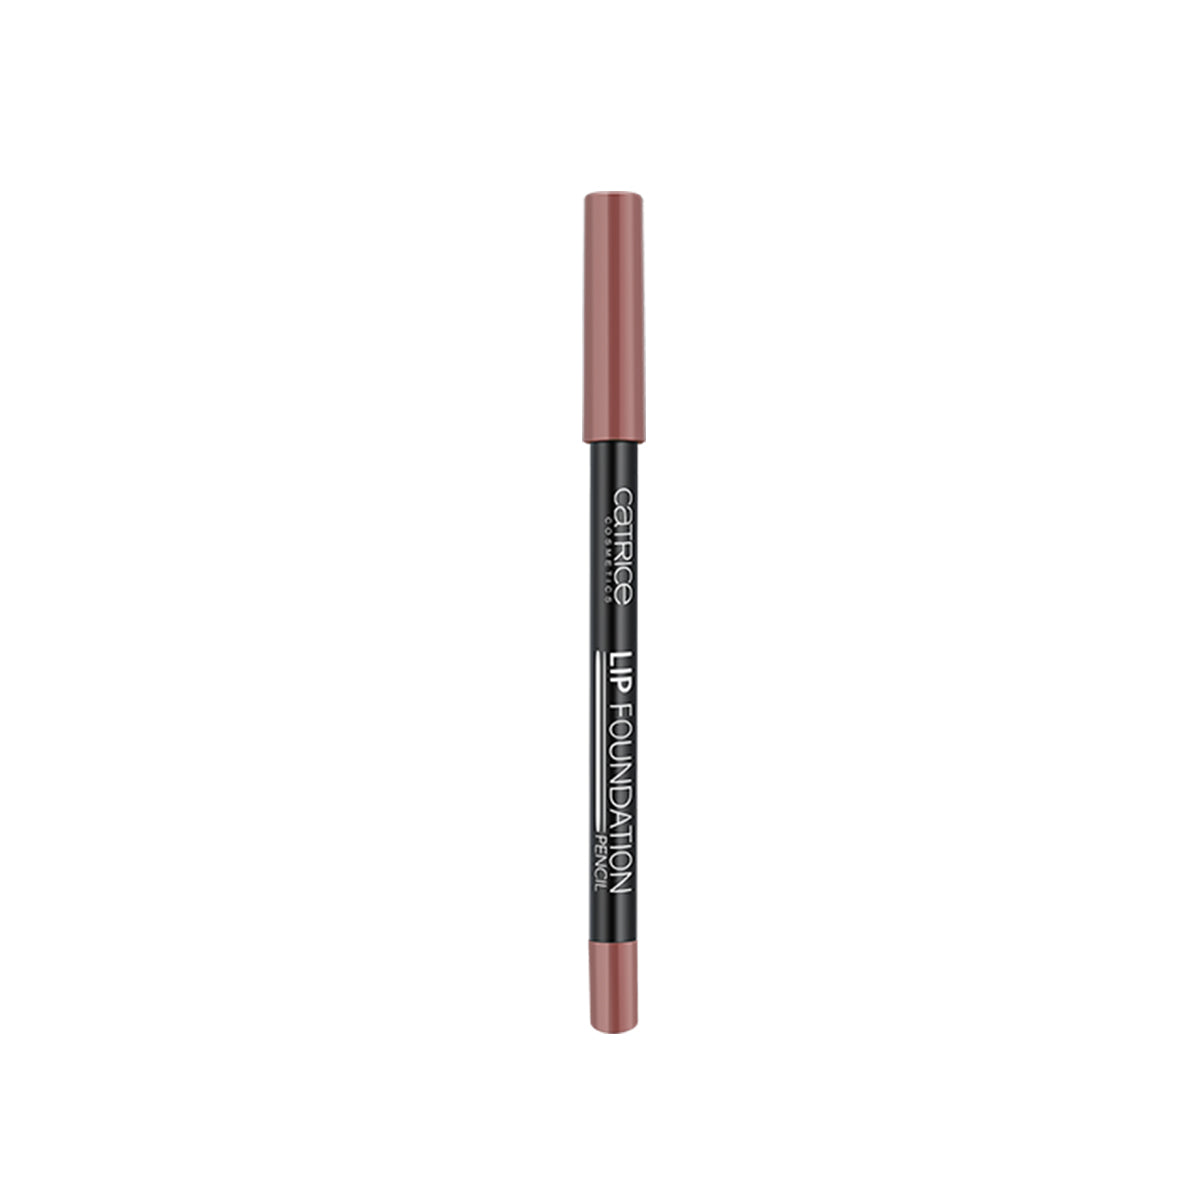 LIP FOUNDATION PENCIL 030 ADDICTED TO CAFE A U LAIT - CATRICE